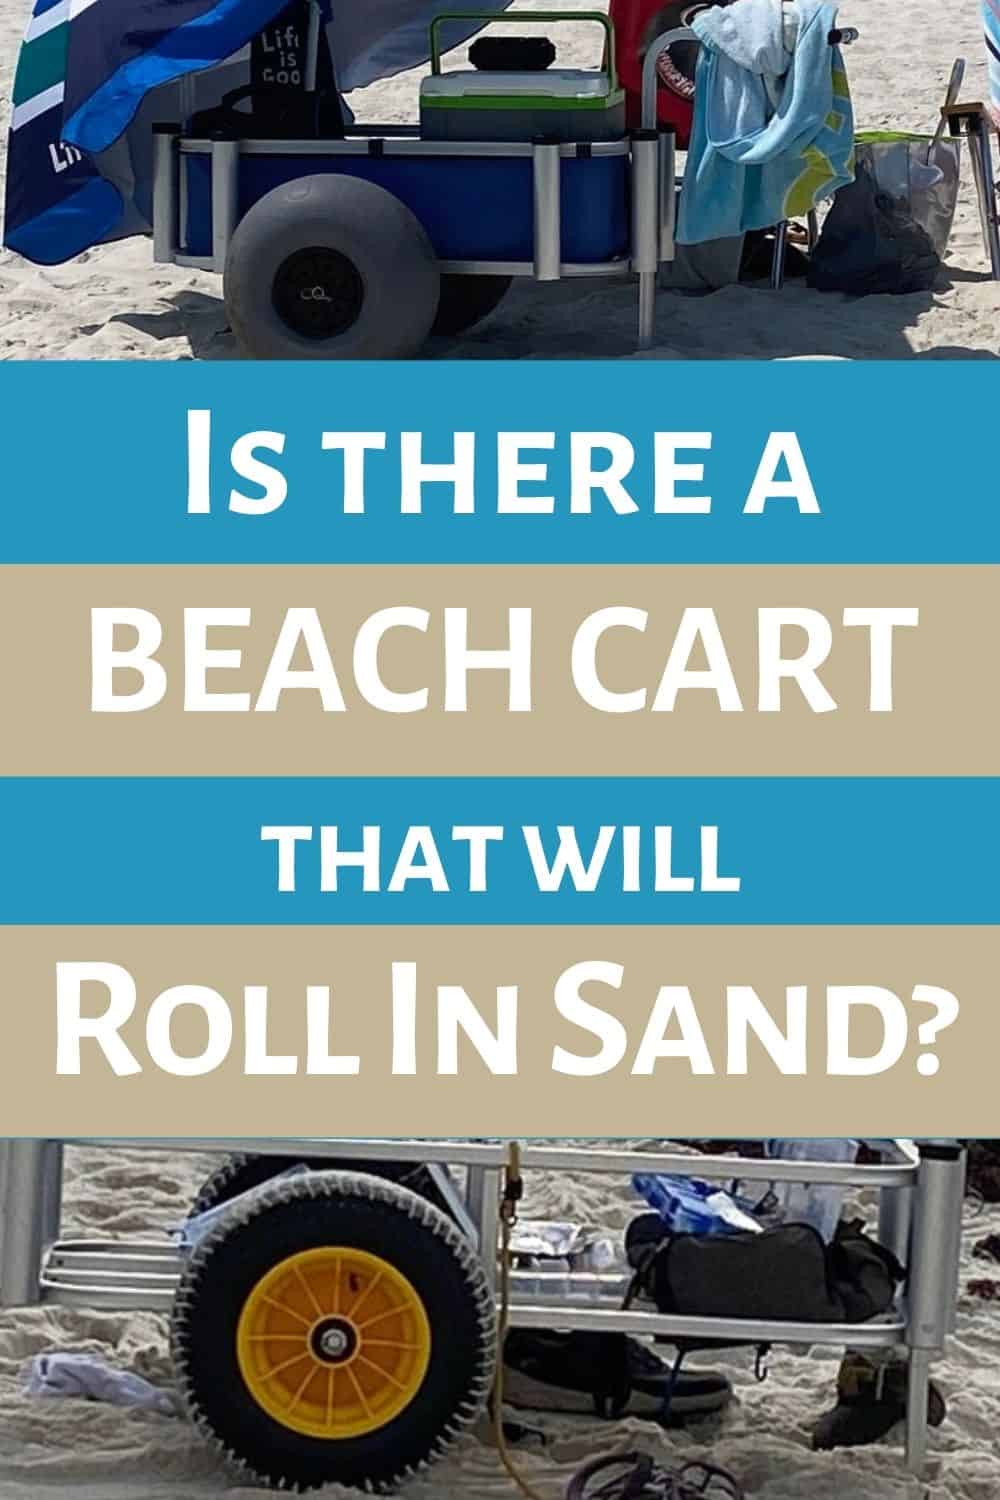 Is there a beach cart that will roll in sand?